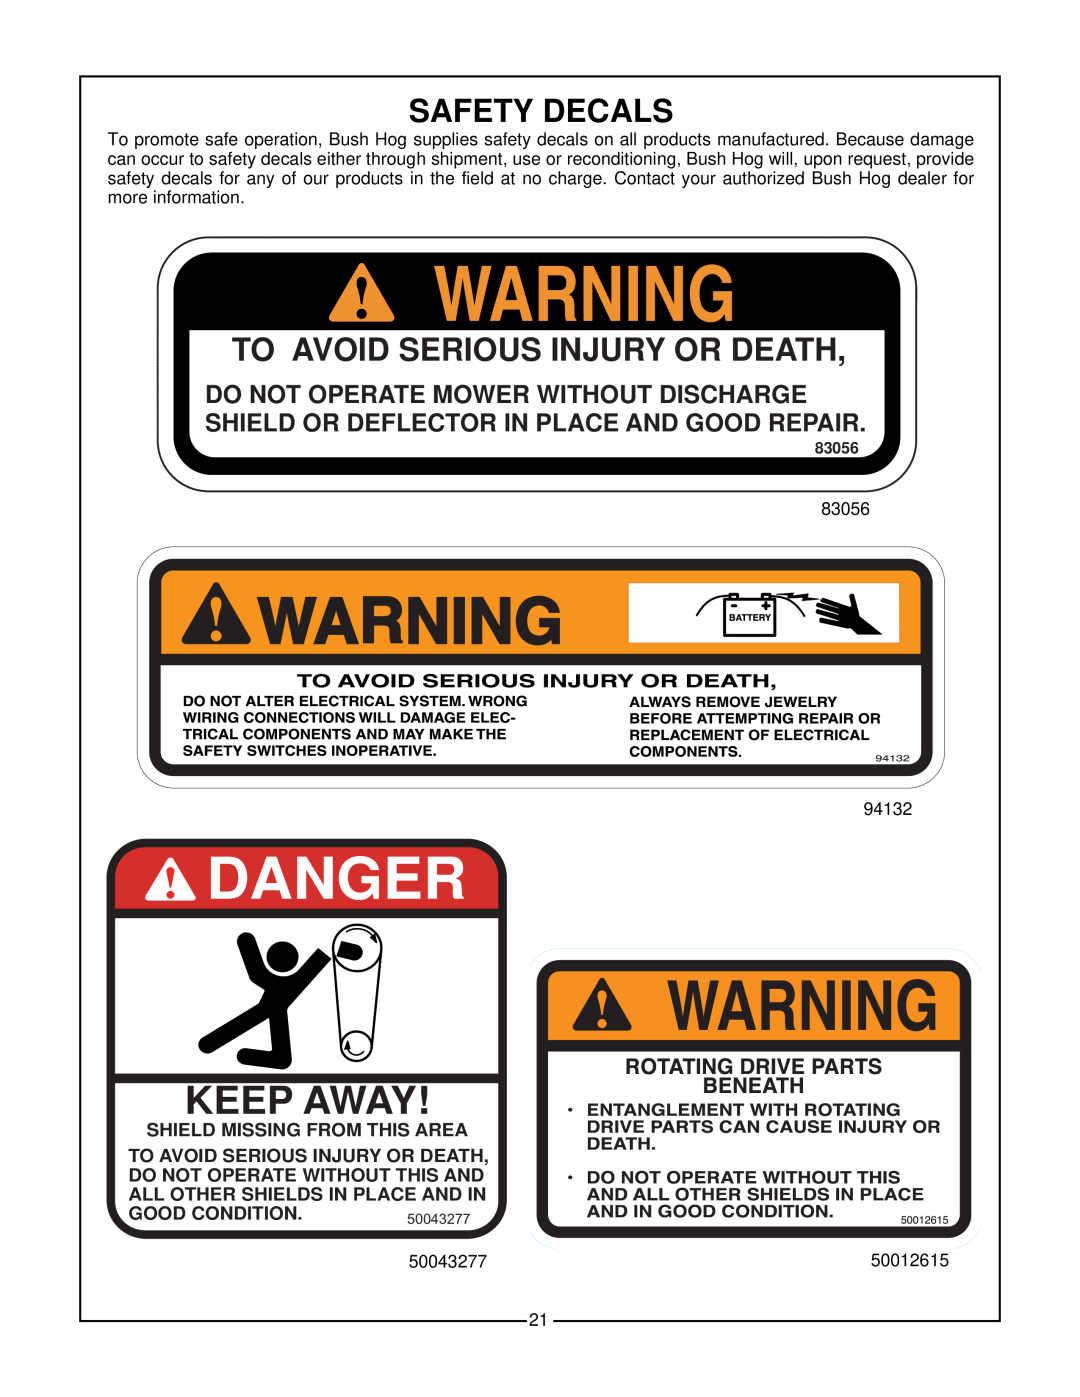 Bush Hog Estate Series Safety Decals, To Avoid Serious Injury Or Death, Danger, Keep Away, Shield Missing From This Area 